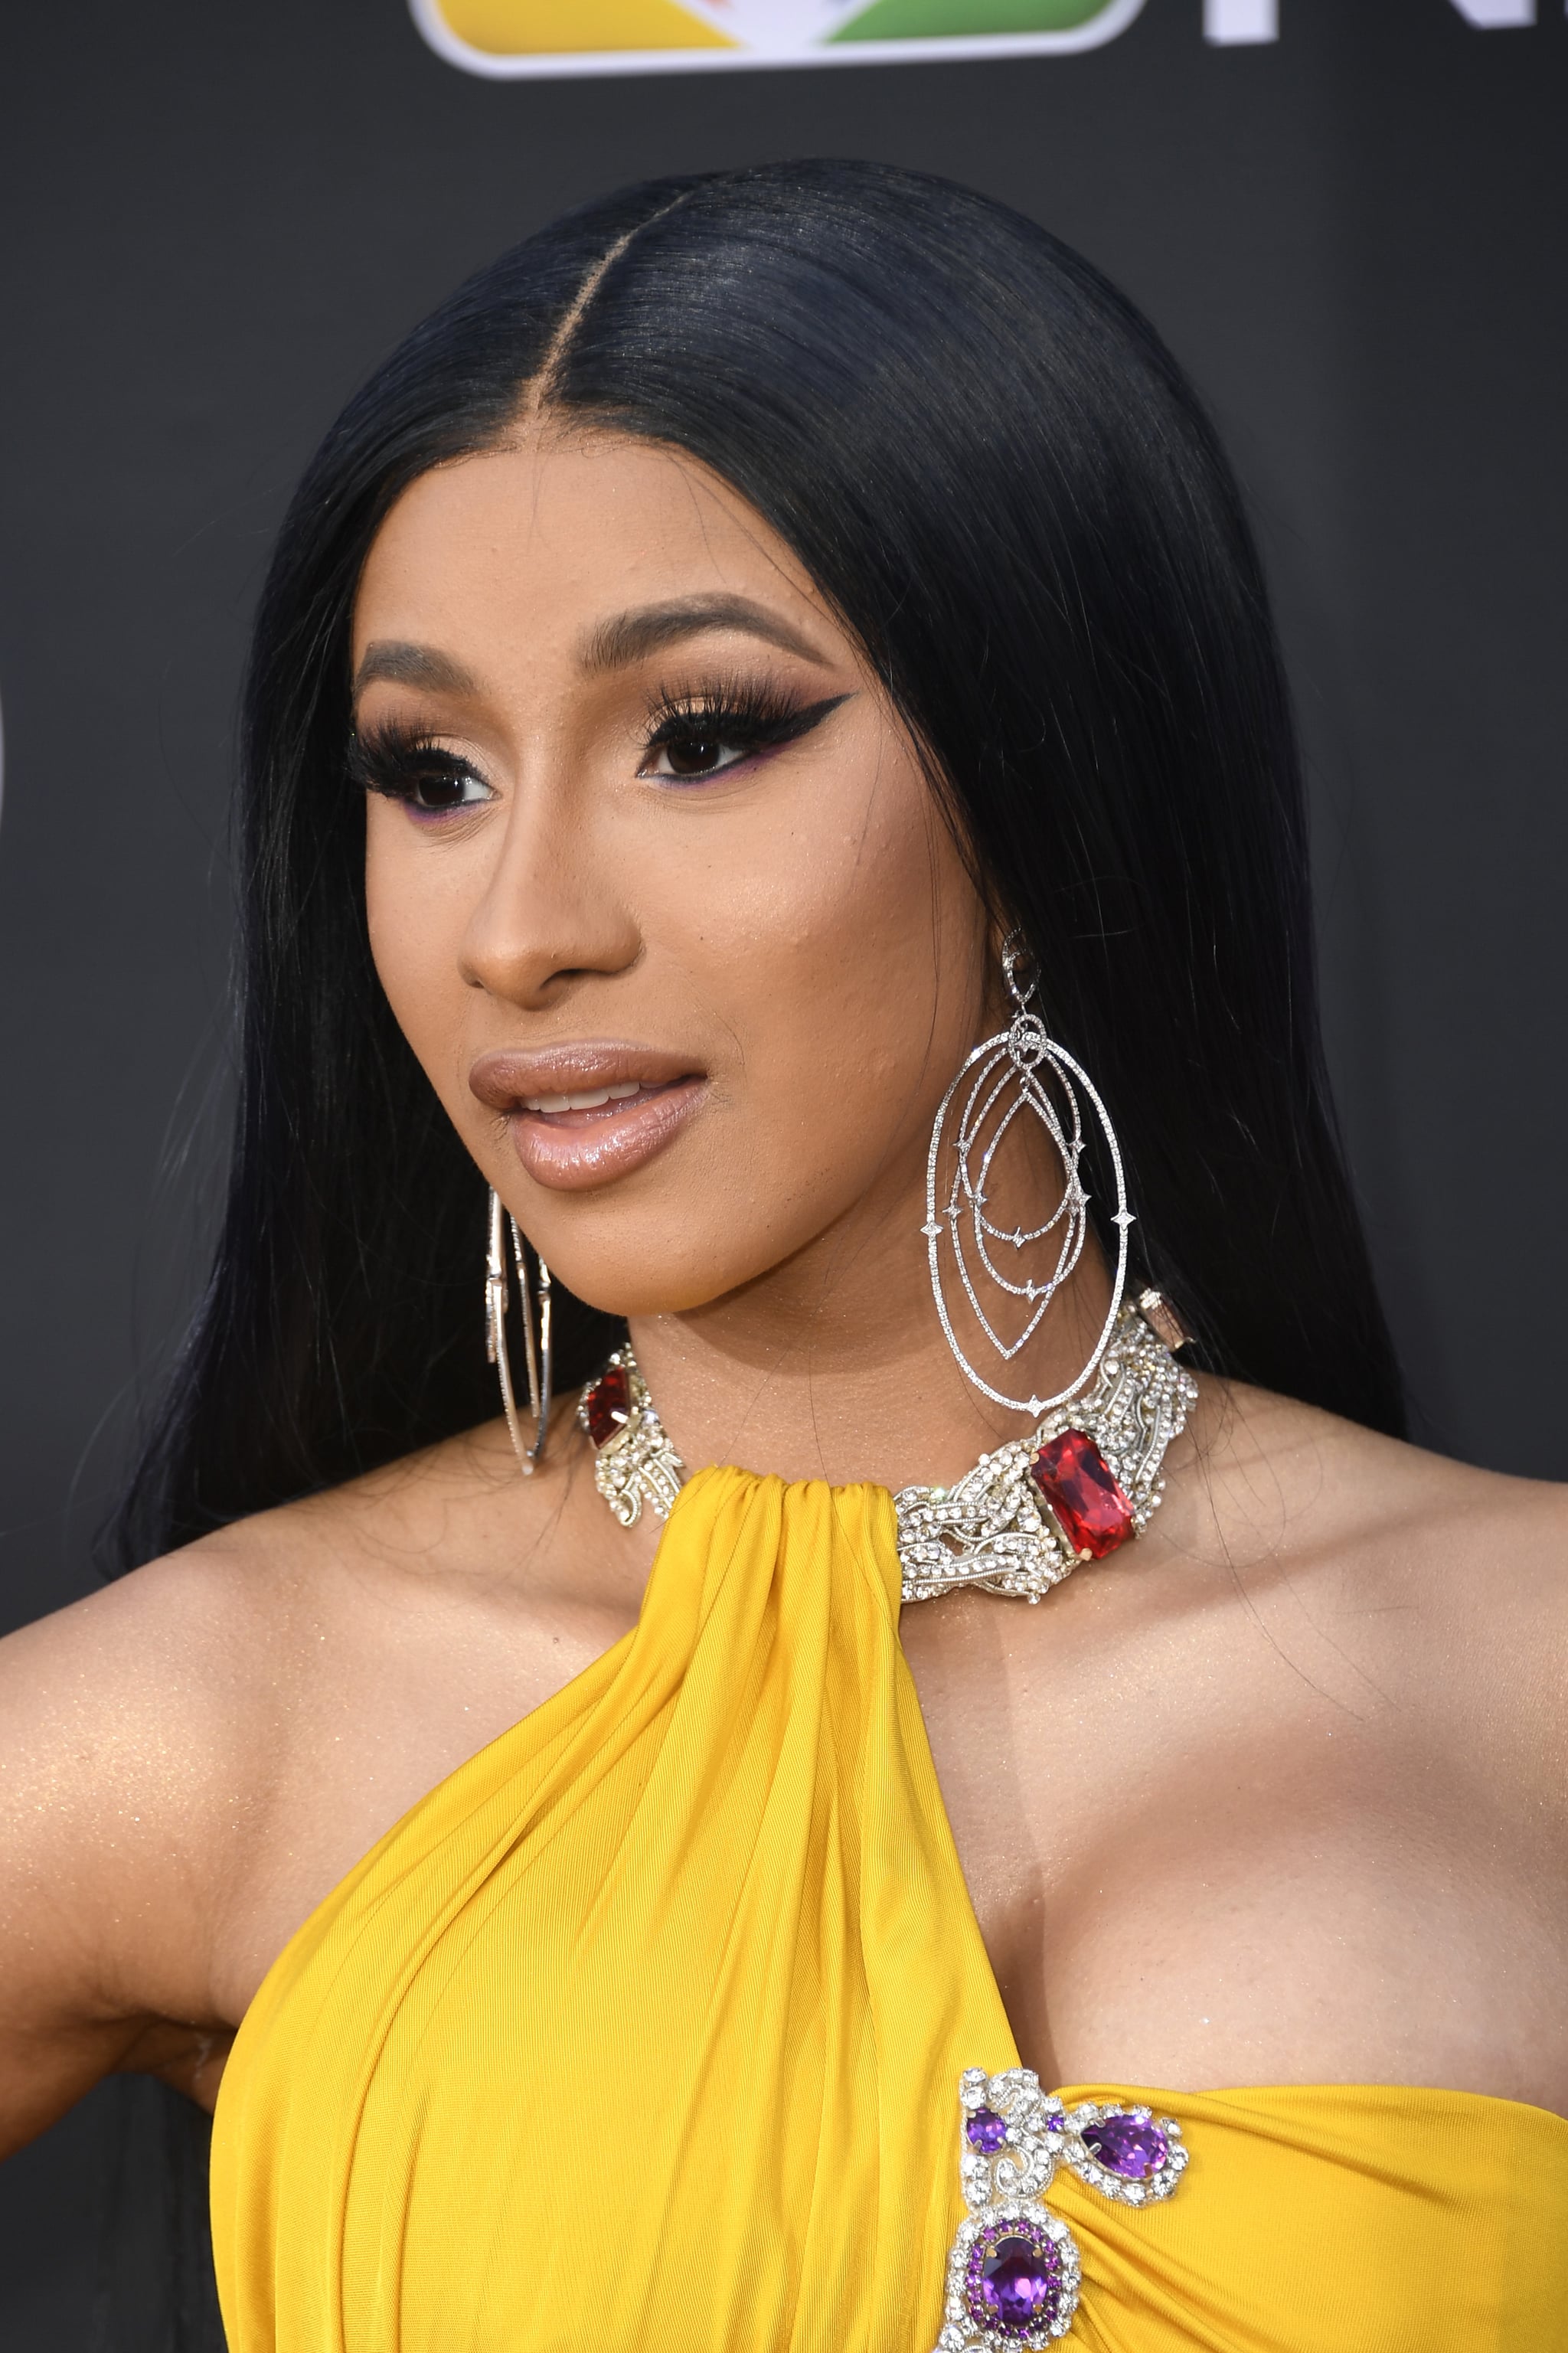 Cardi Bs 2nd Grammys Outfit Looks Like a SpaceAge Joan of Arc